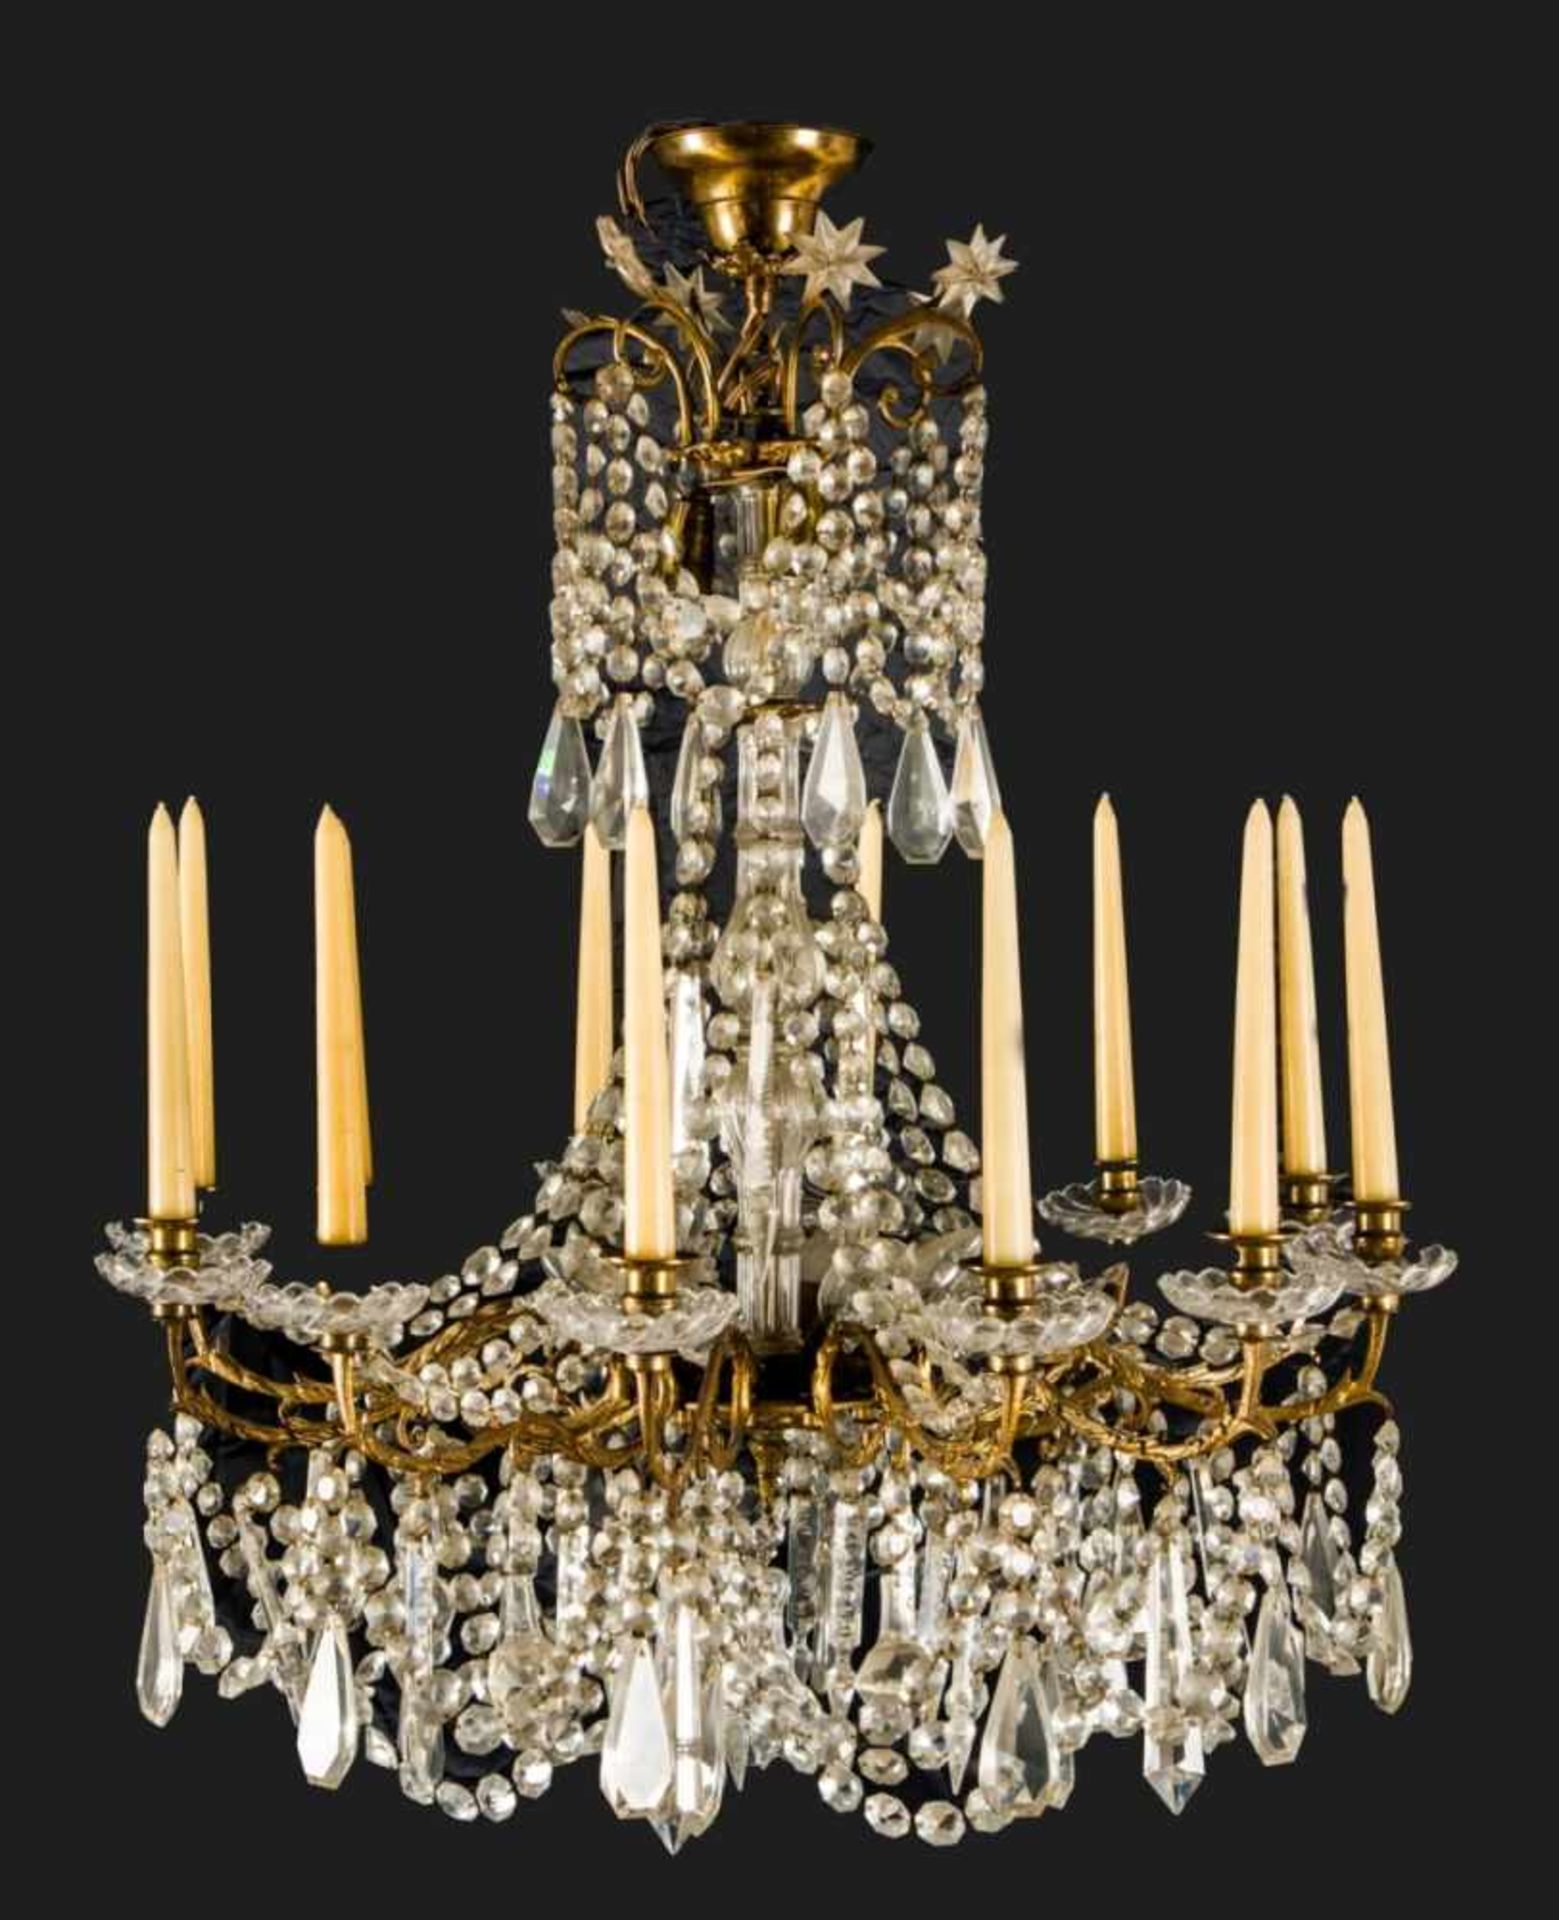 Magnificent electrified chandelier with real candles, brass, faceted crystal glasshanging, 12 flames